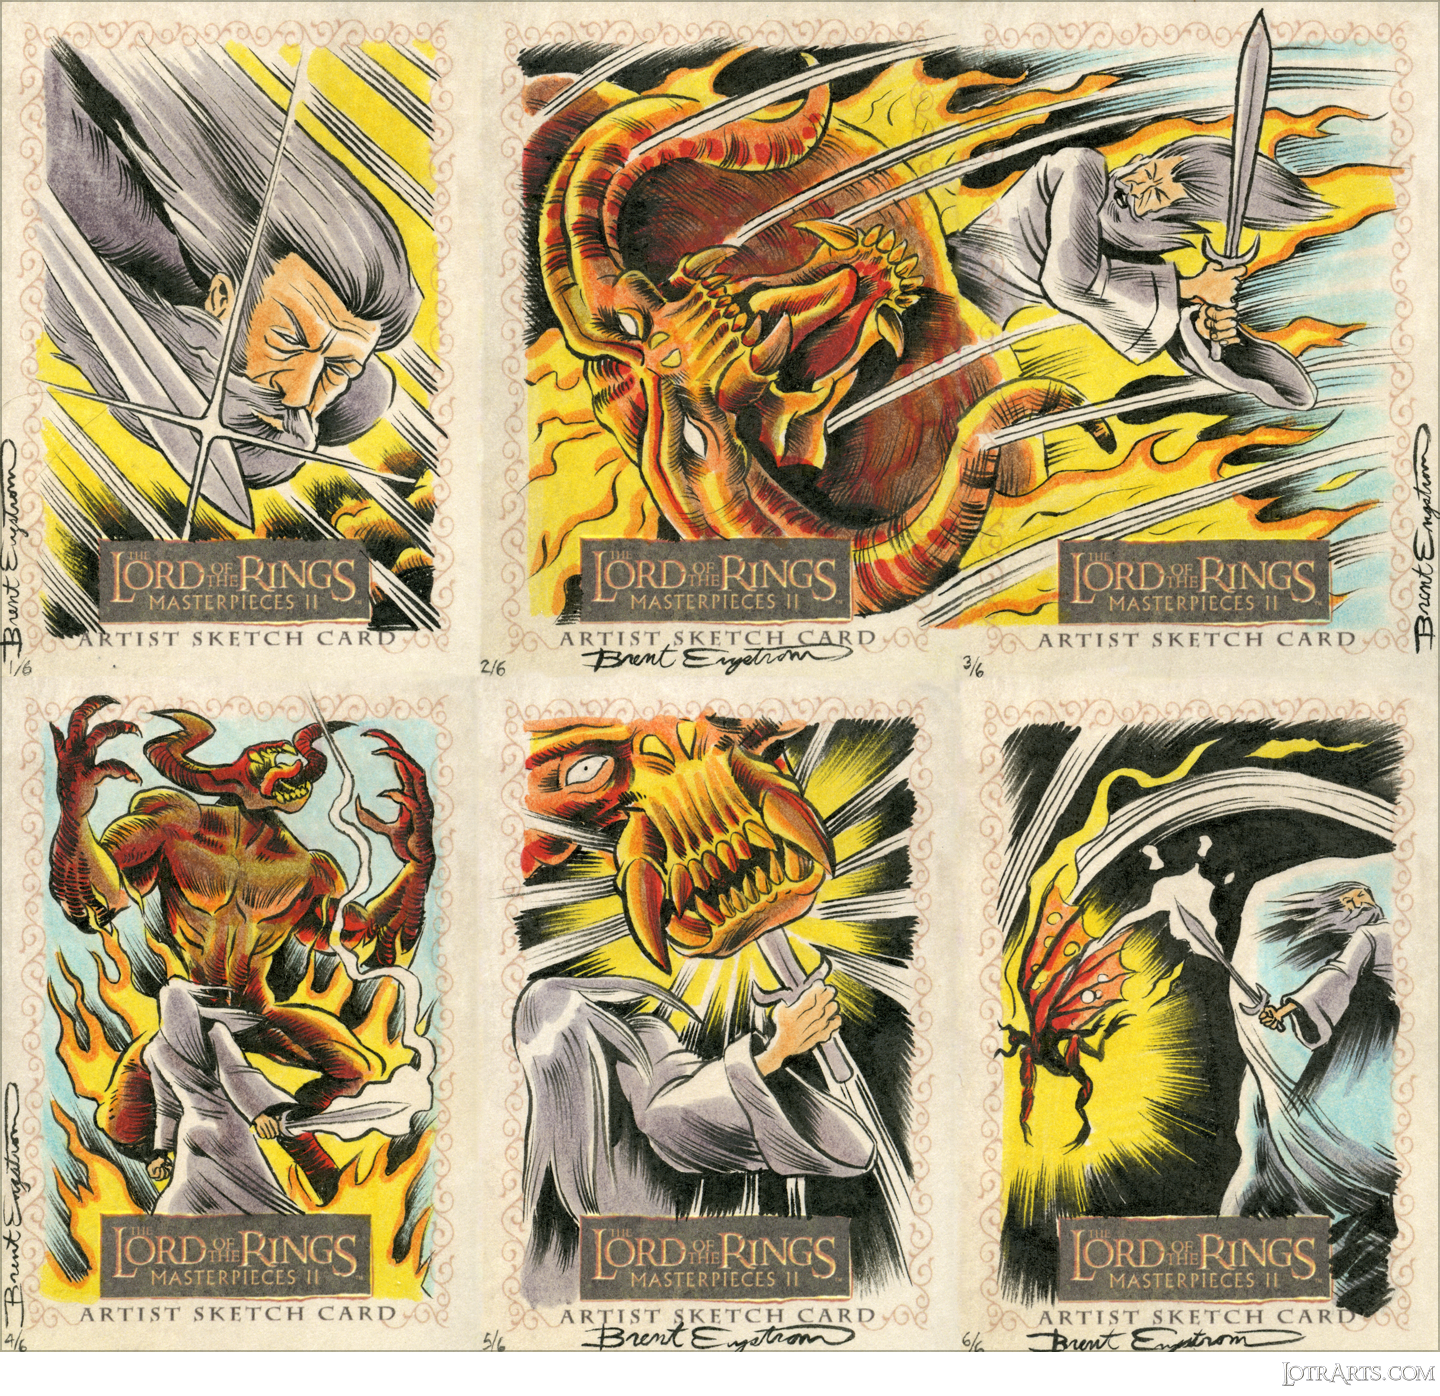 Battle of the Balrog and Gandalf, six-card sequenced scene panel, by Engstrom: artist return sketches<span class="ngViews">16 views</span>